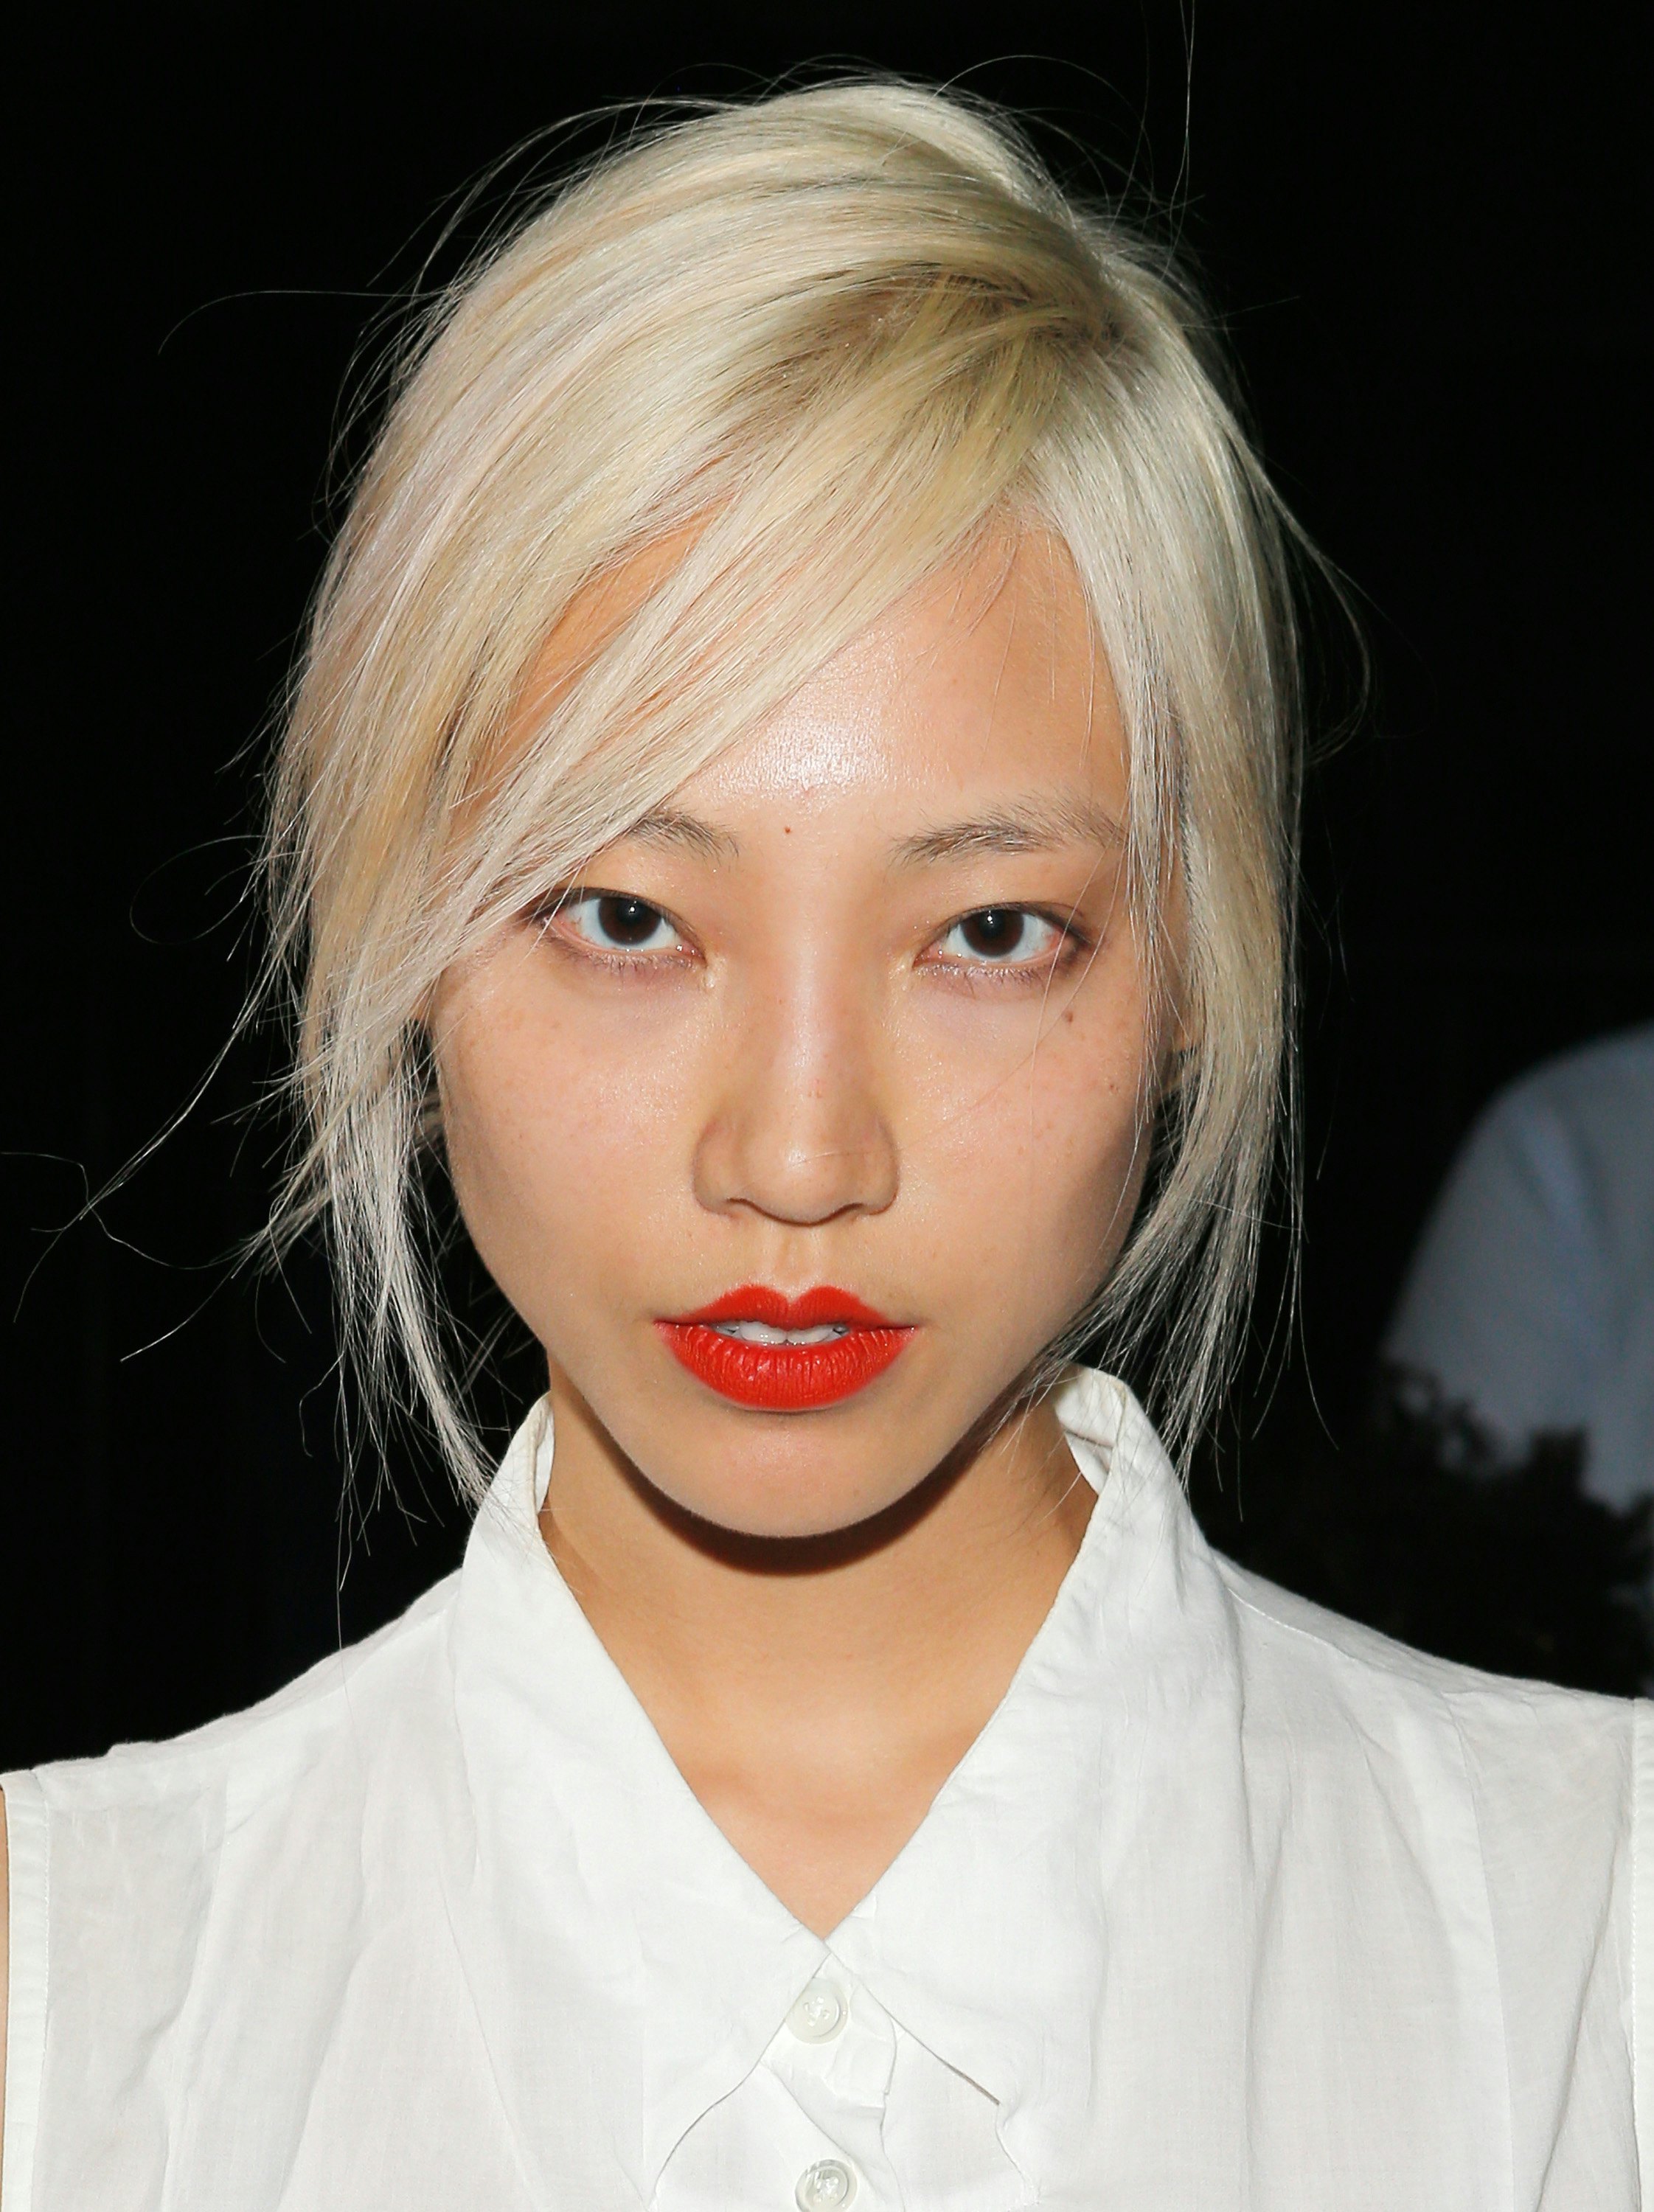 Proof Asian Hair Can Go Blonde Plus Tips For Finding Your Best